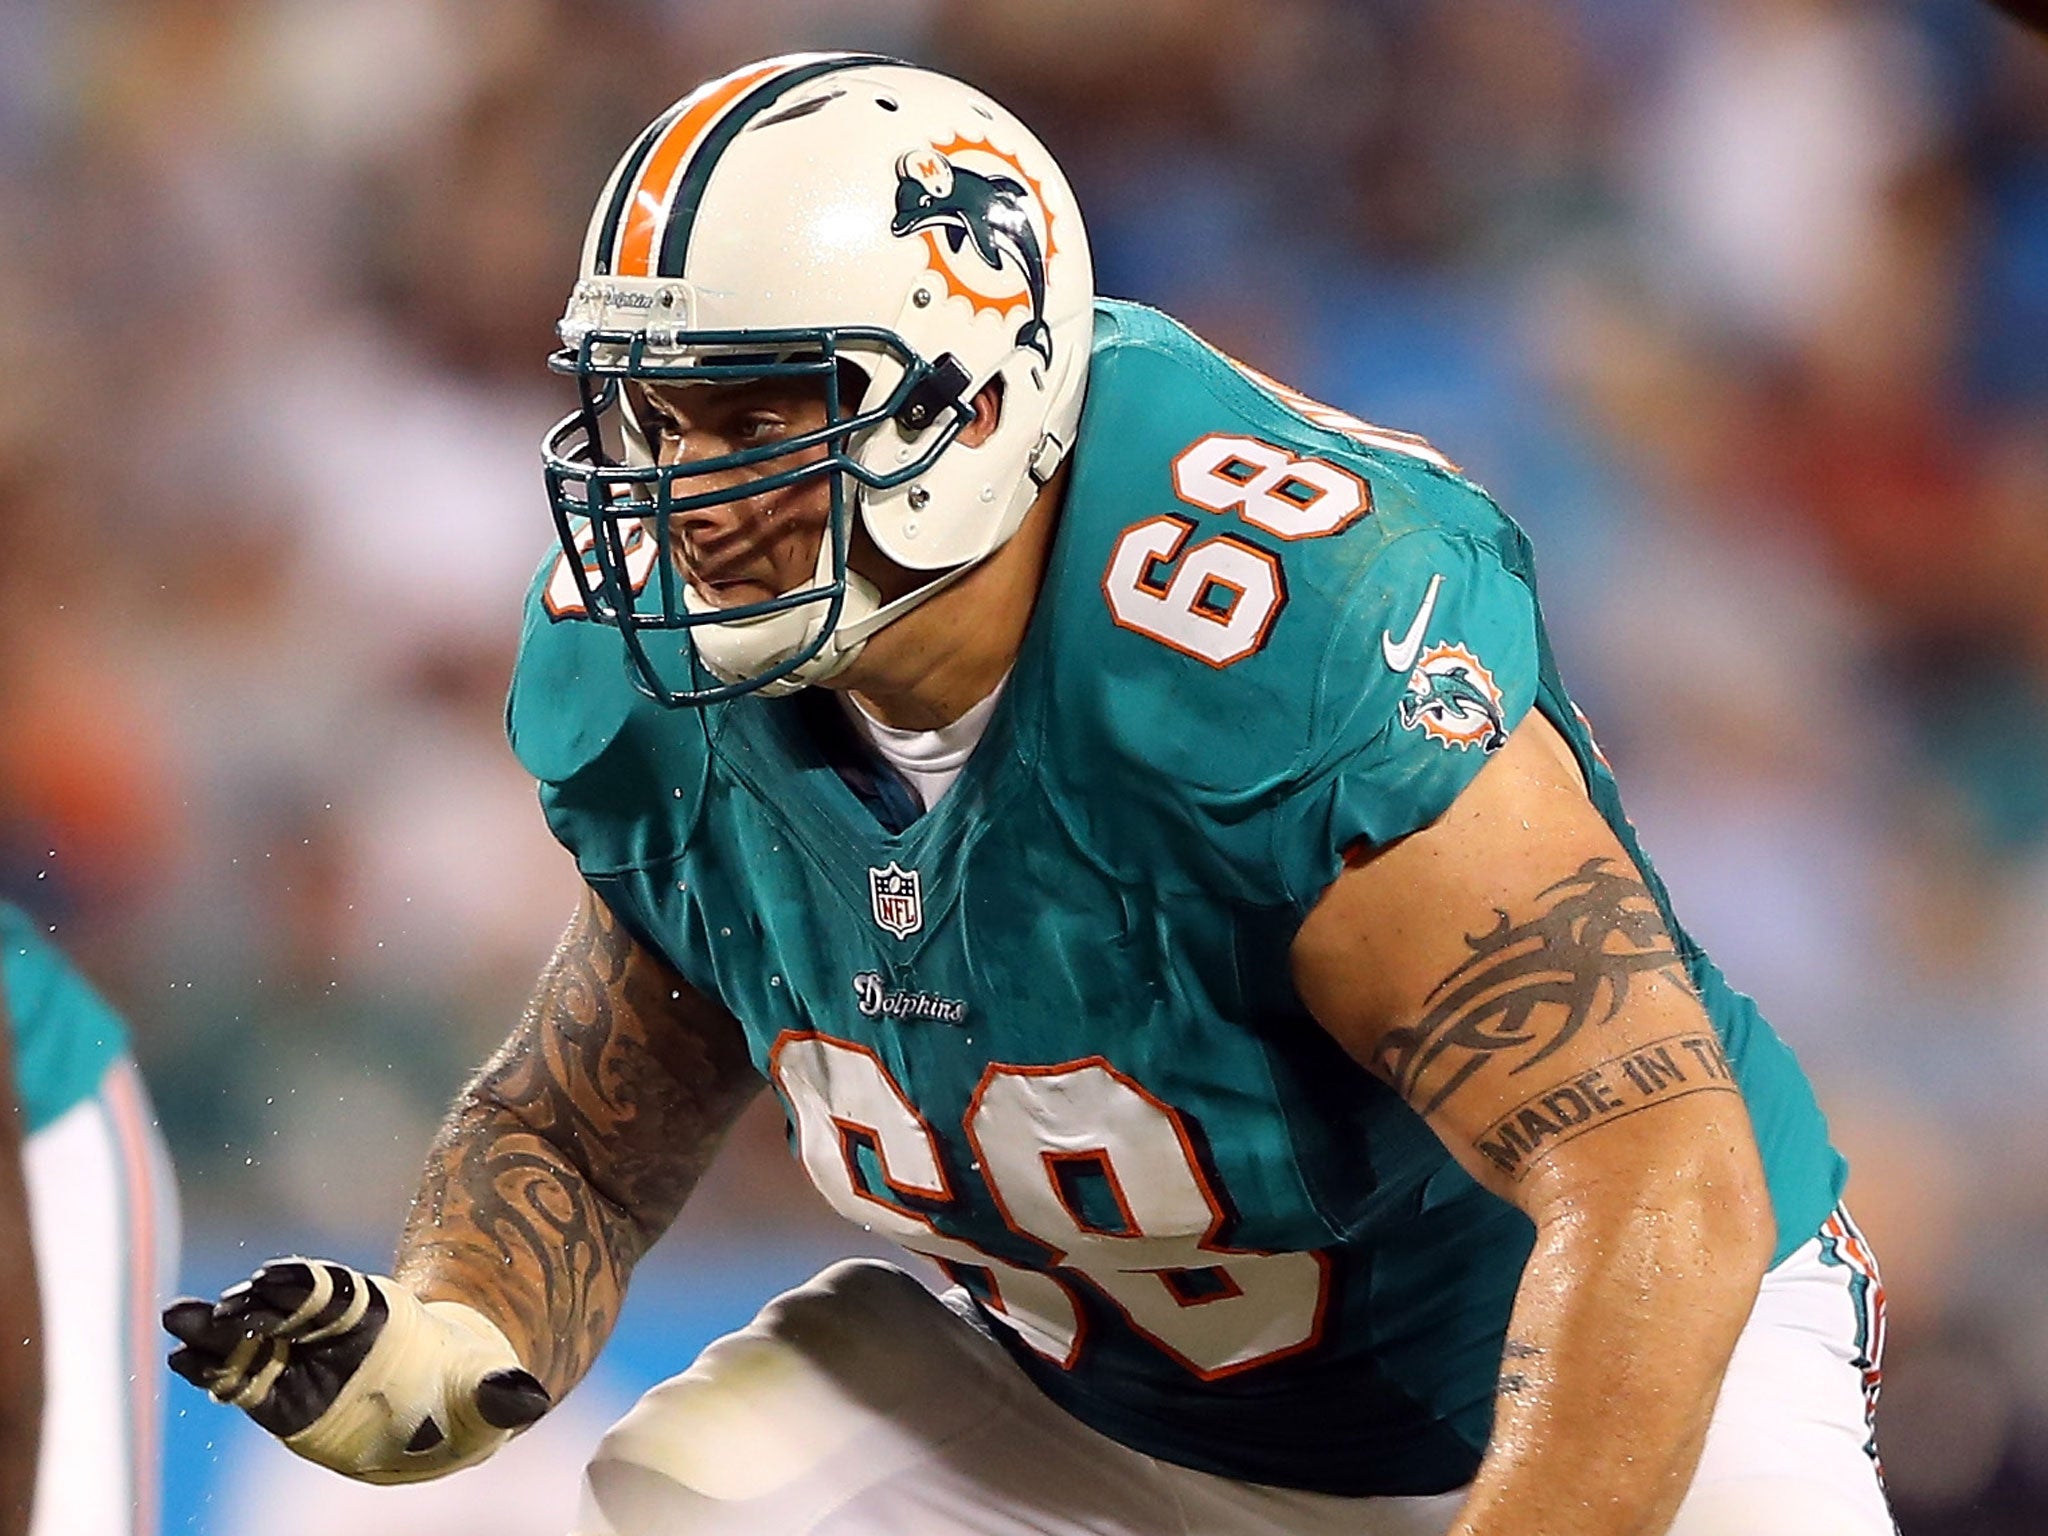 Richie Incognito has given an interview to Fox Sports